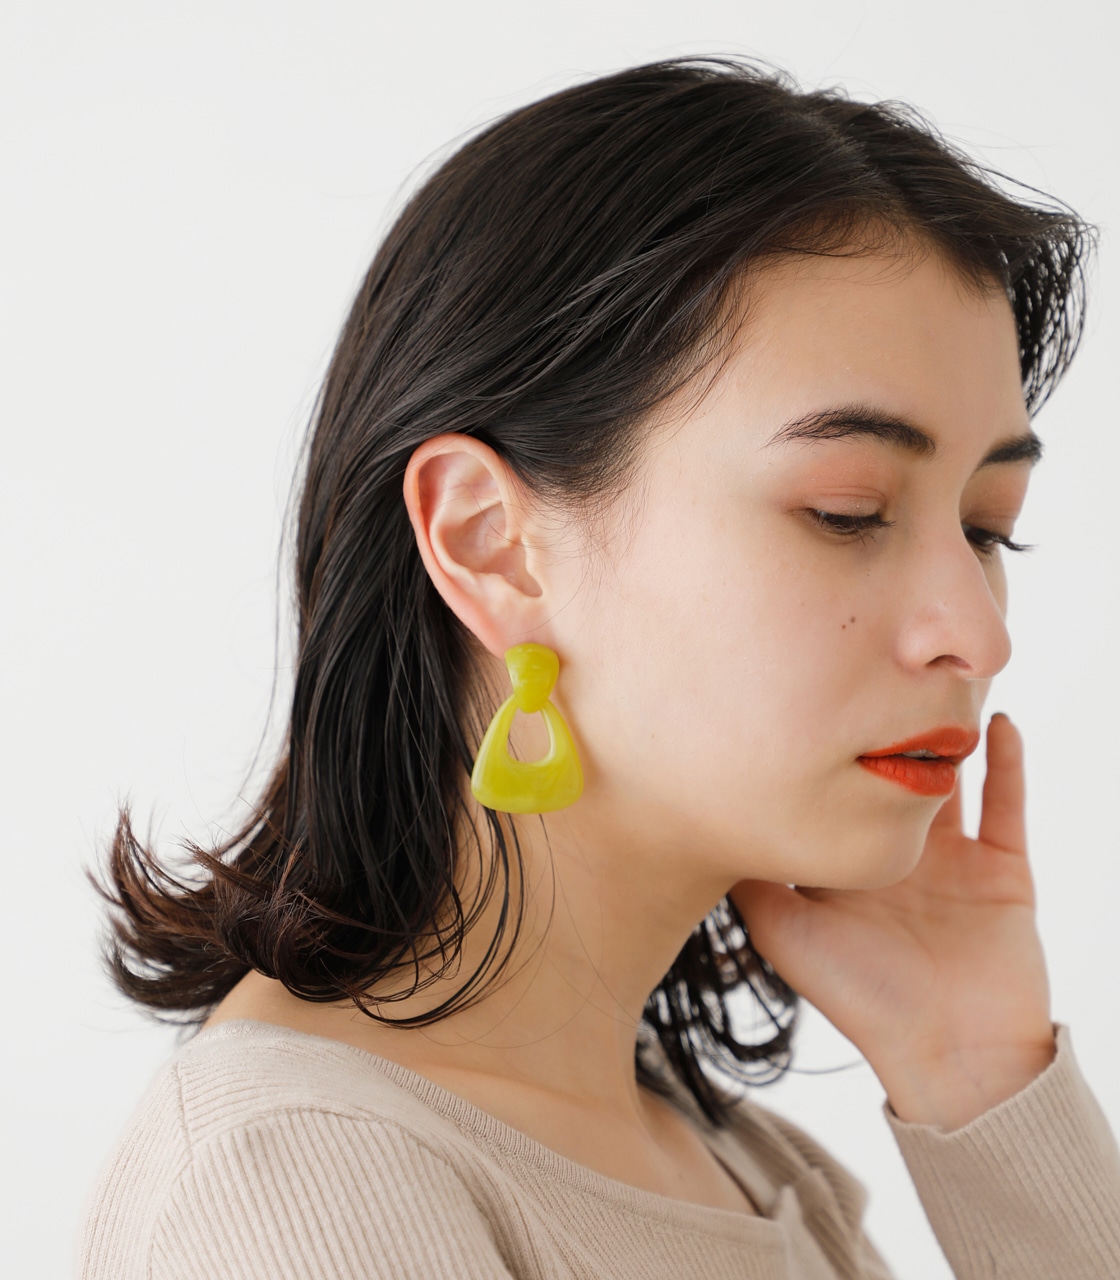 LIGHT COLOR MARBLE EARRINGS/ライトカラーマーブルピアス【MOOK54掲載 90354】 詳細画像 柄LIME 7